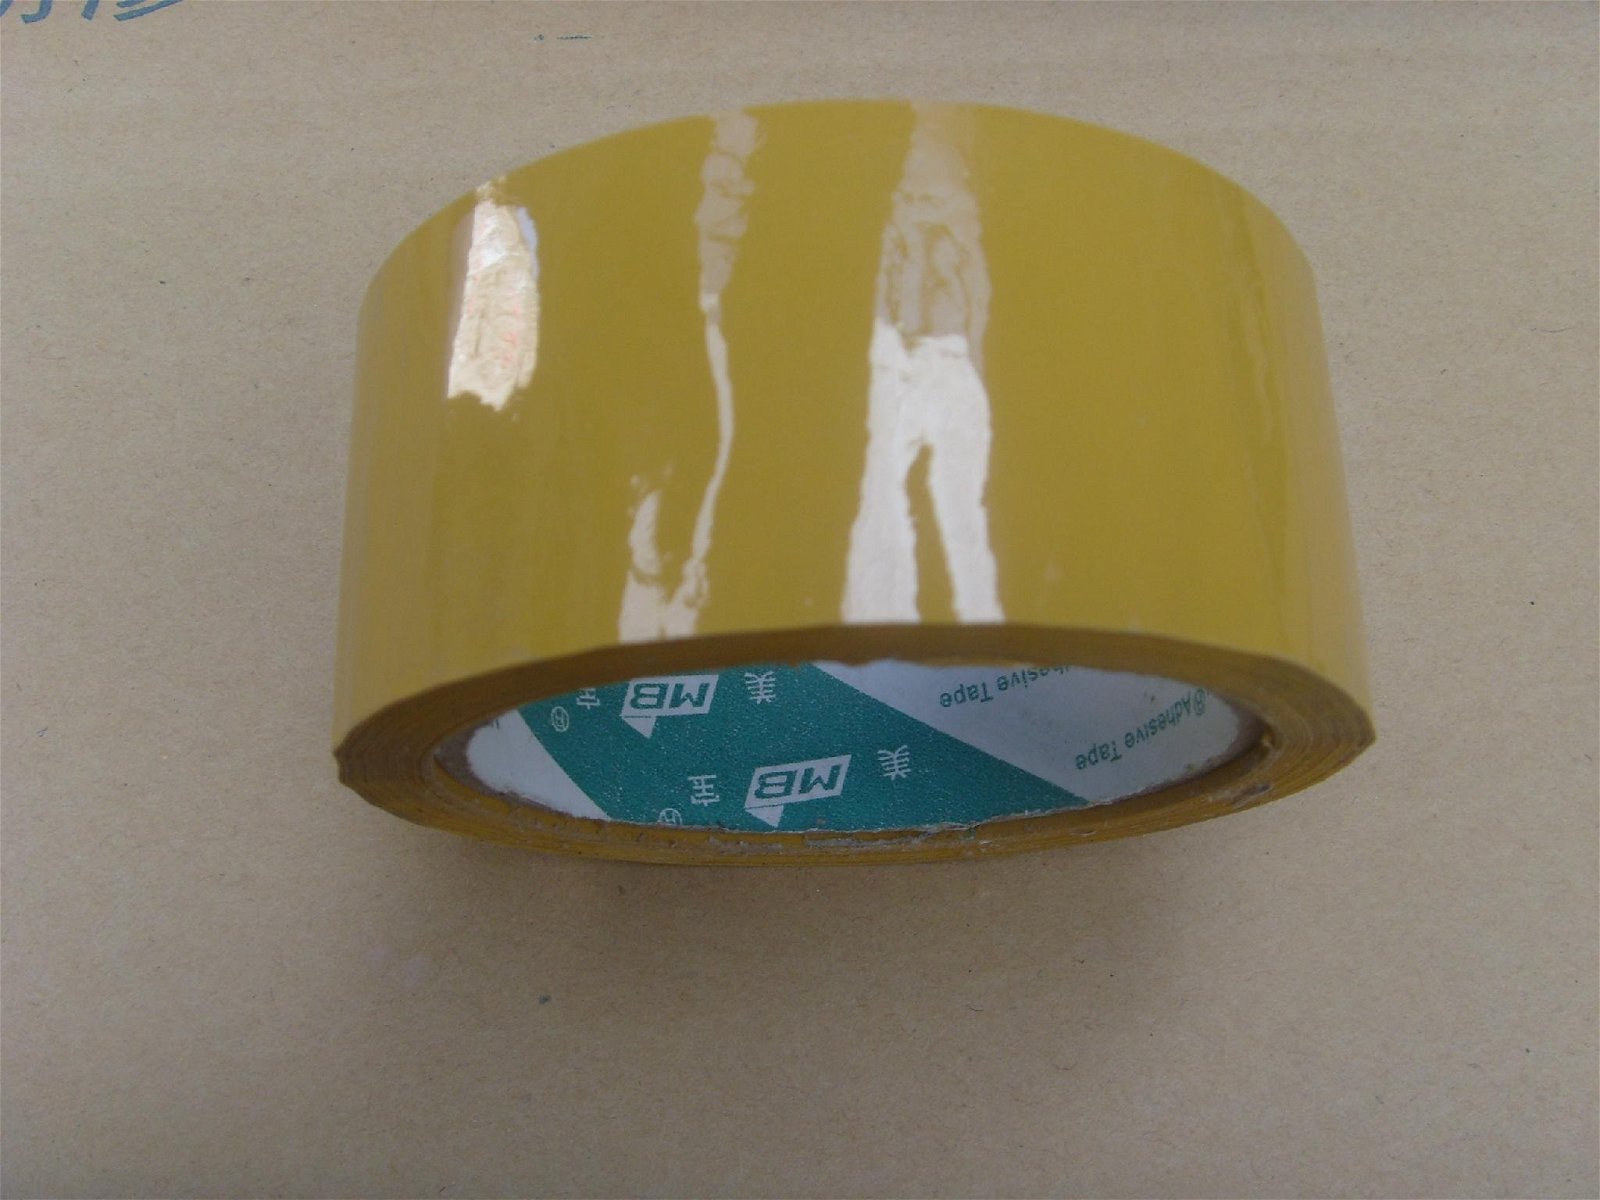 BOPP Adhesive Tape with LOGO Printed On Paper Core  3